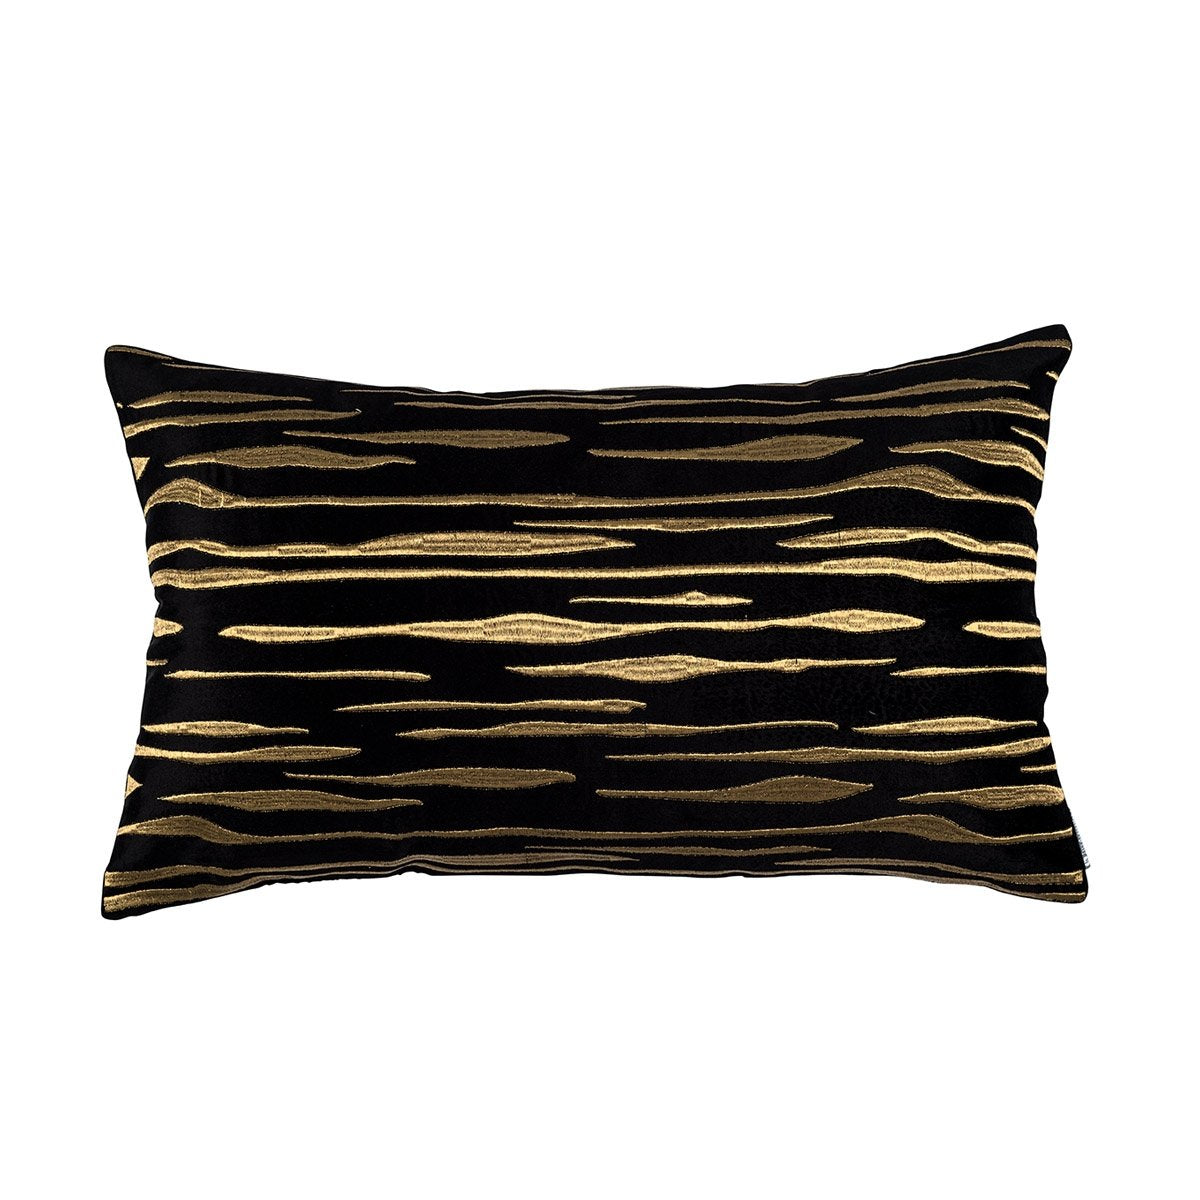 Lili Alessandra Decorative Pillow - Zara Black and Gold Pillow at Fig Linens and Home